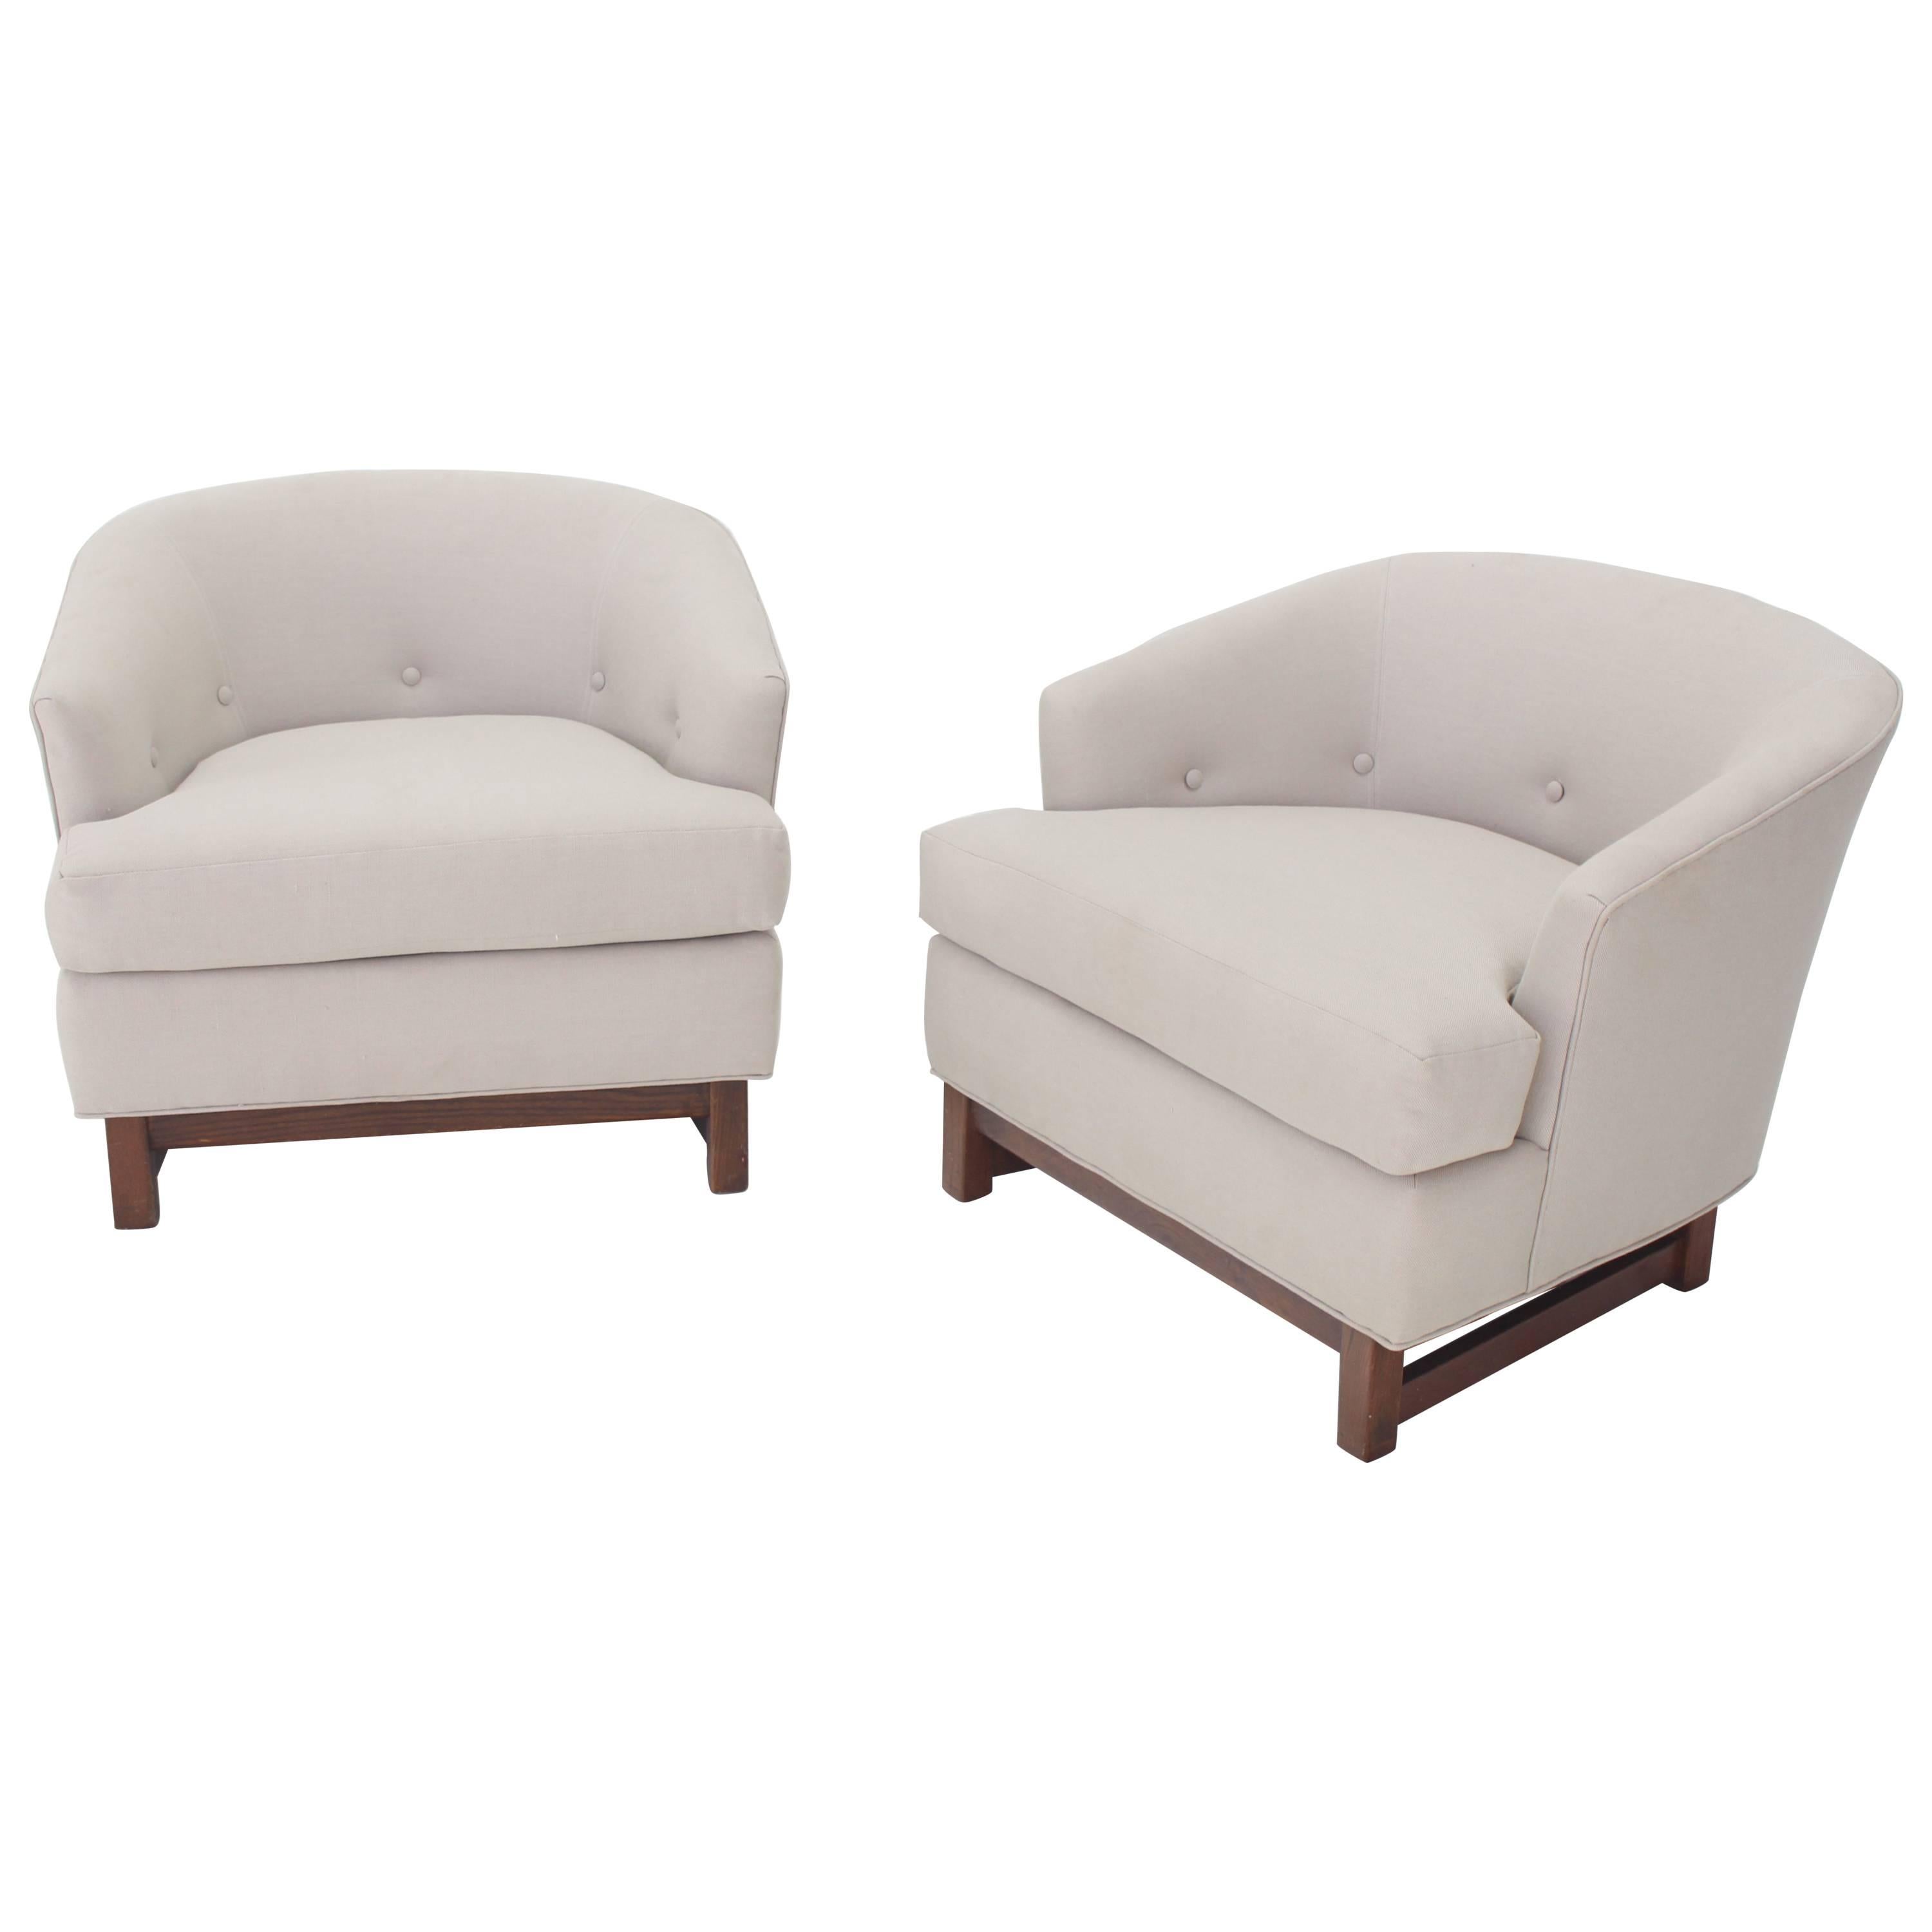 Pair of Mid-Century Modern Barrel Lounge Chairs by Selig